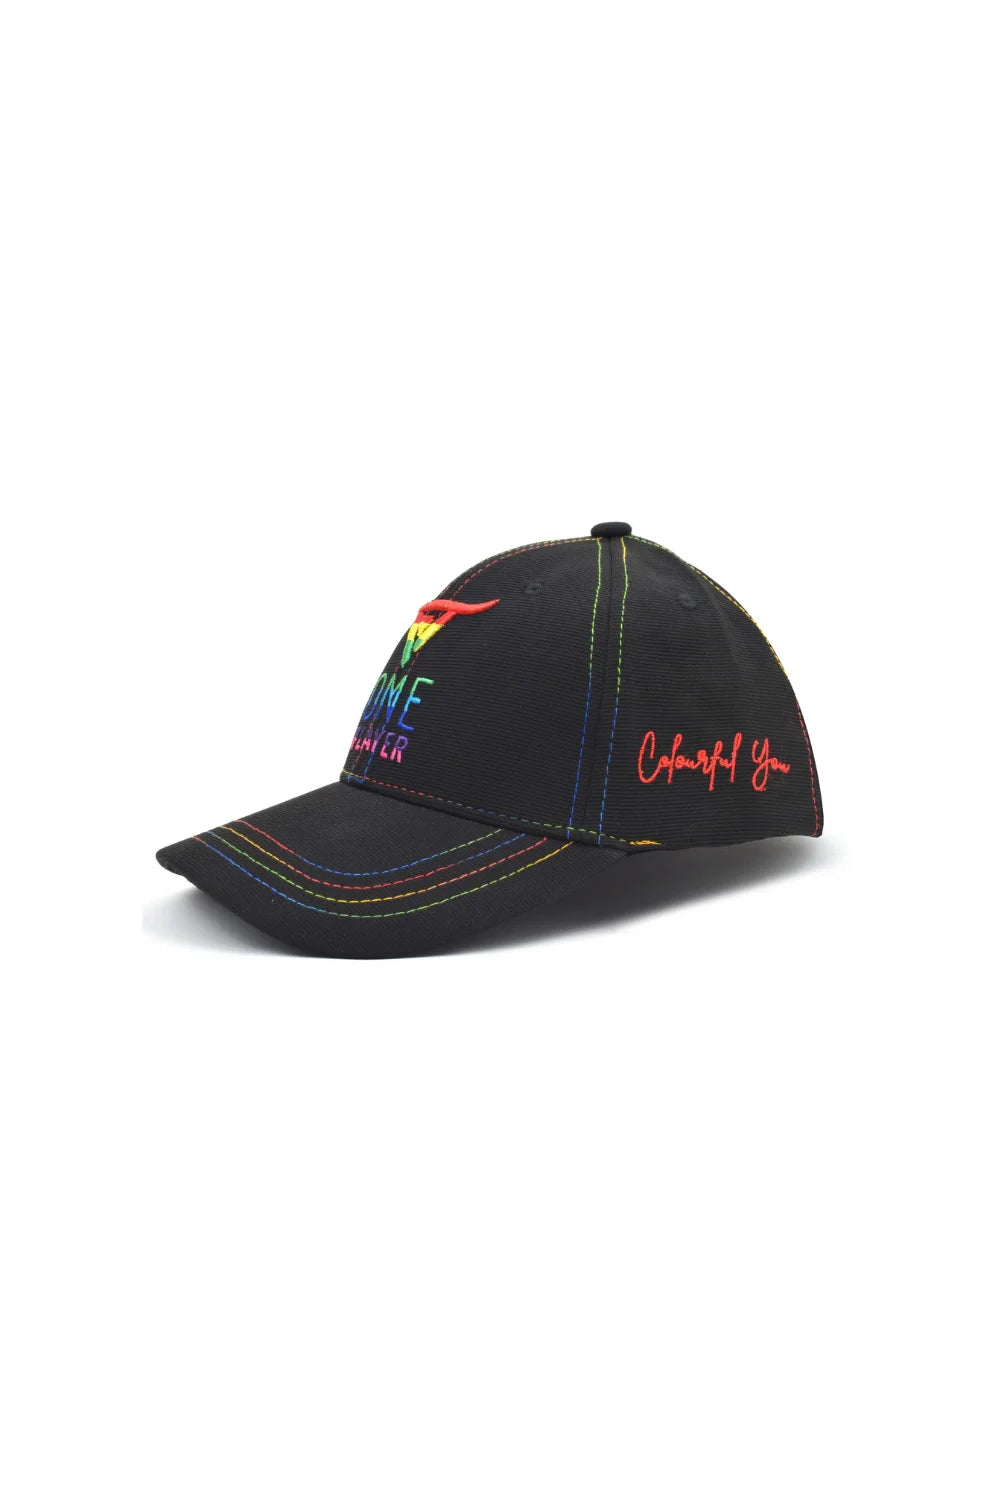 Unisex Black Multi Color  Limited Edition Cap by One Player